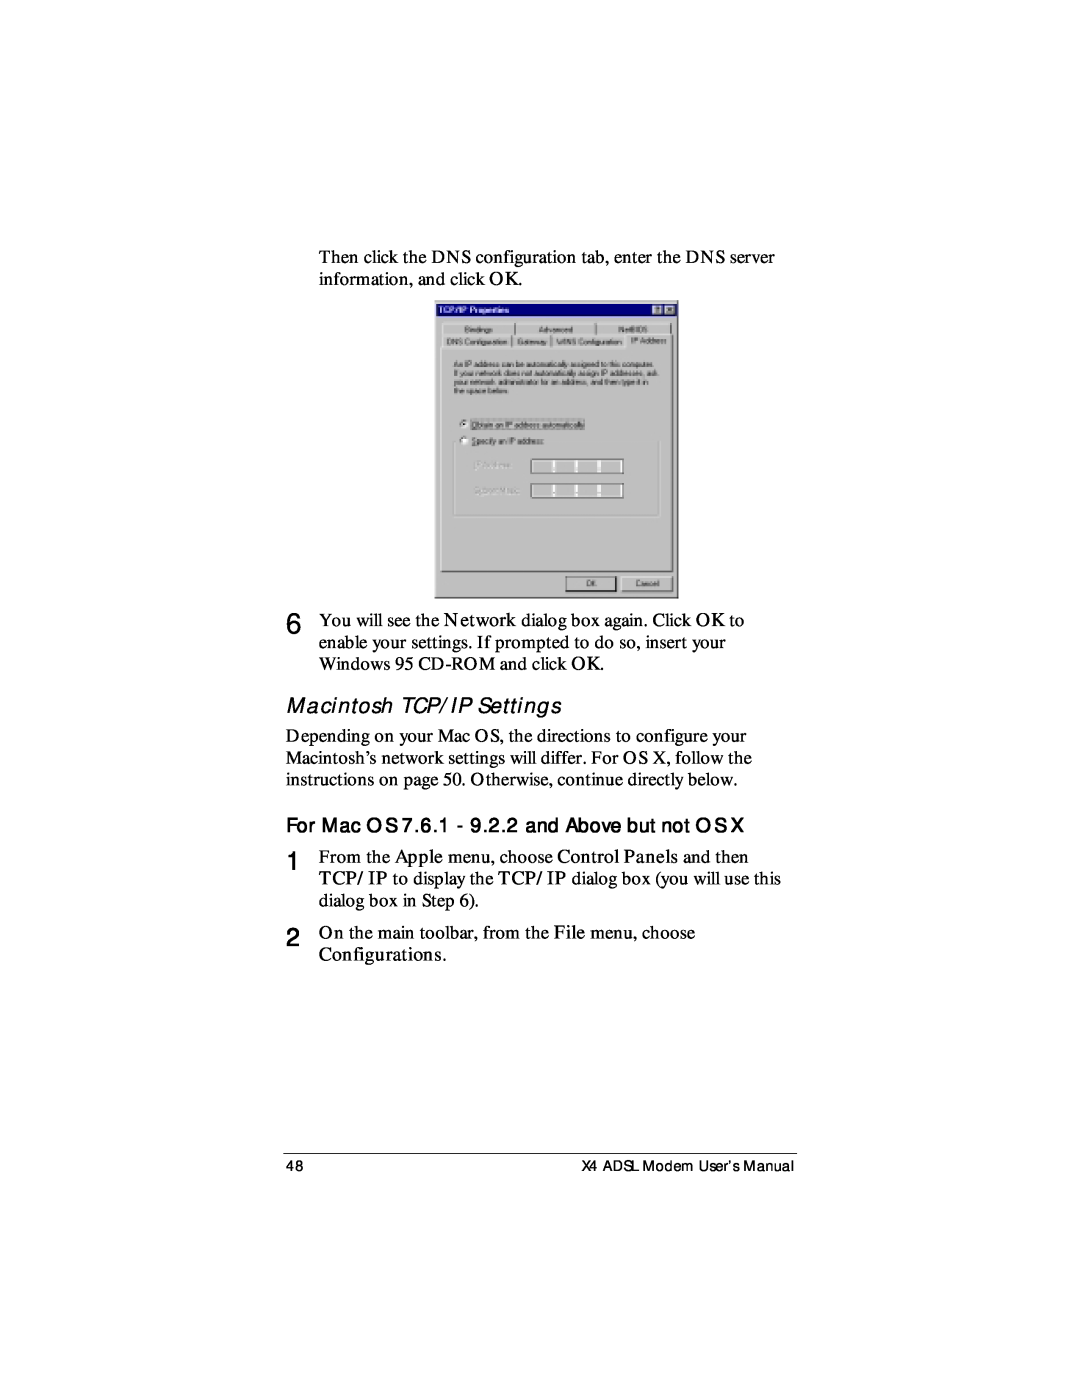 Zoom X4 manual Macintosh TCP/IP Settings, For Mac OS 7.6.1 - 9.2.2 and Above but not OS 